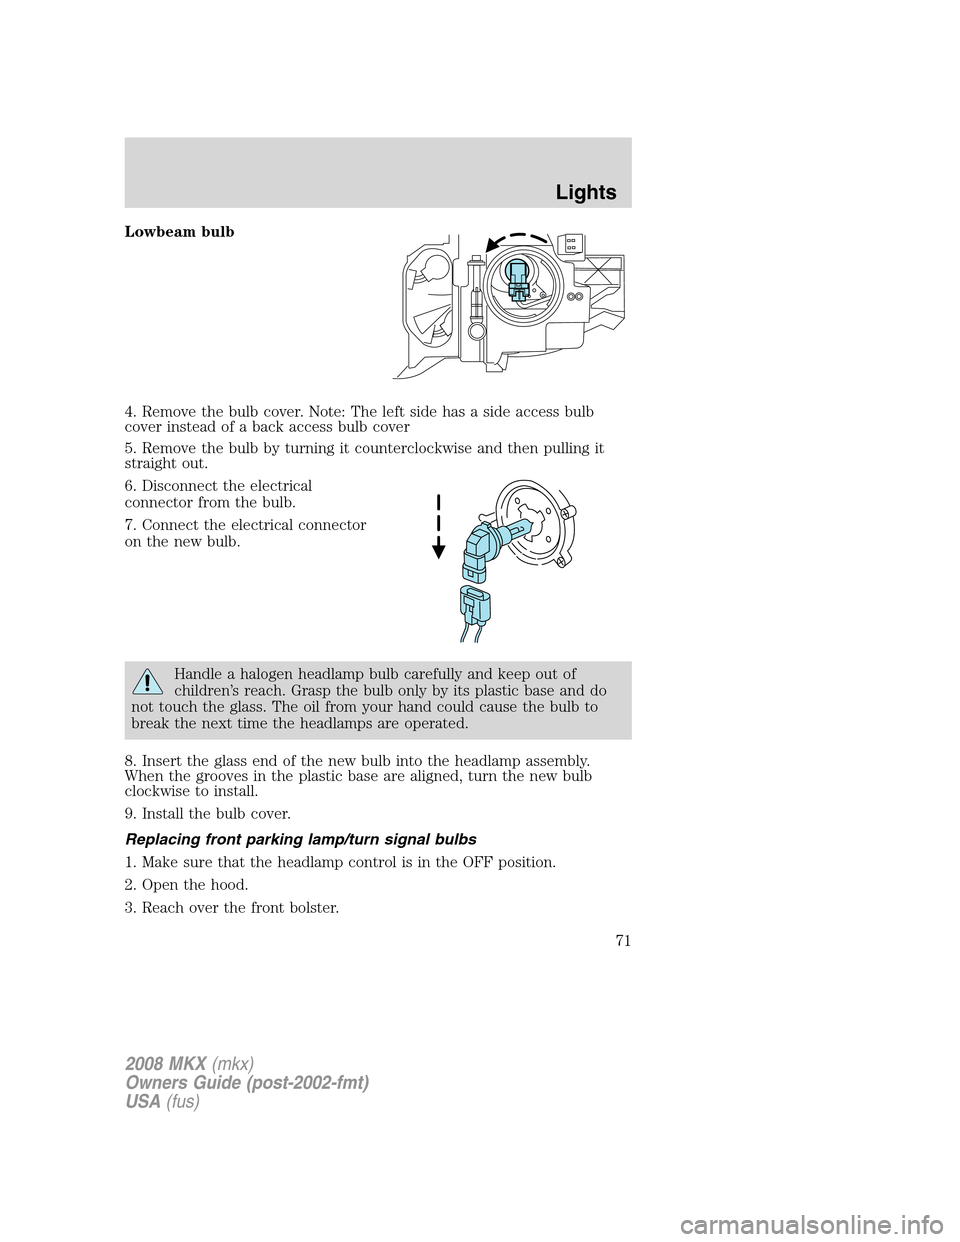 LINCOLN MKX 2008  Owners Manual Lowbeam bulb
4. Remove the bulb cover. Note: The left side has a side access bulb
cover instead of a back access bulb cover
5. Remove the bulb by turning it counterclockwise and then pulling it
straig